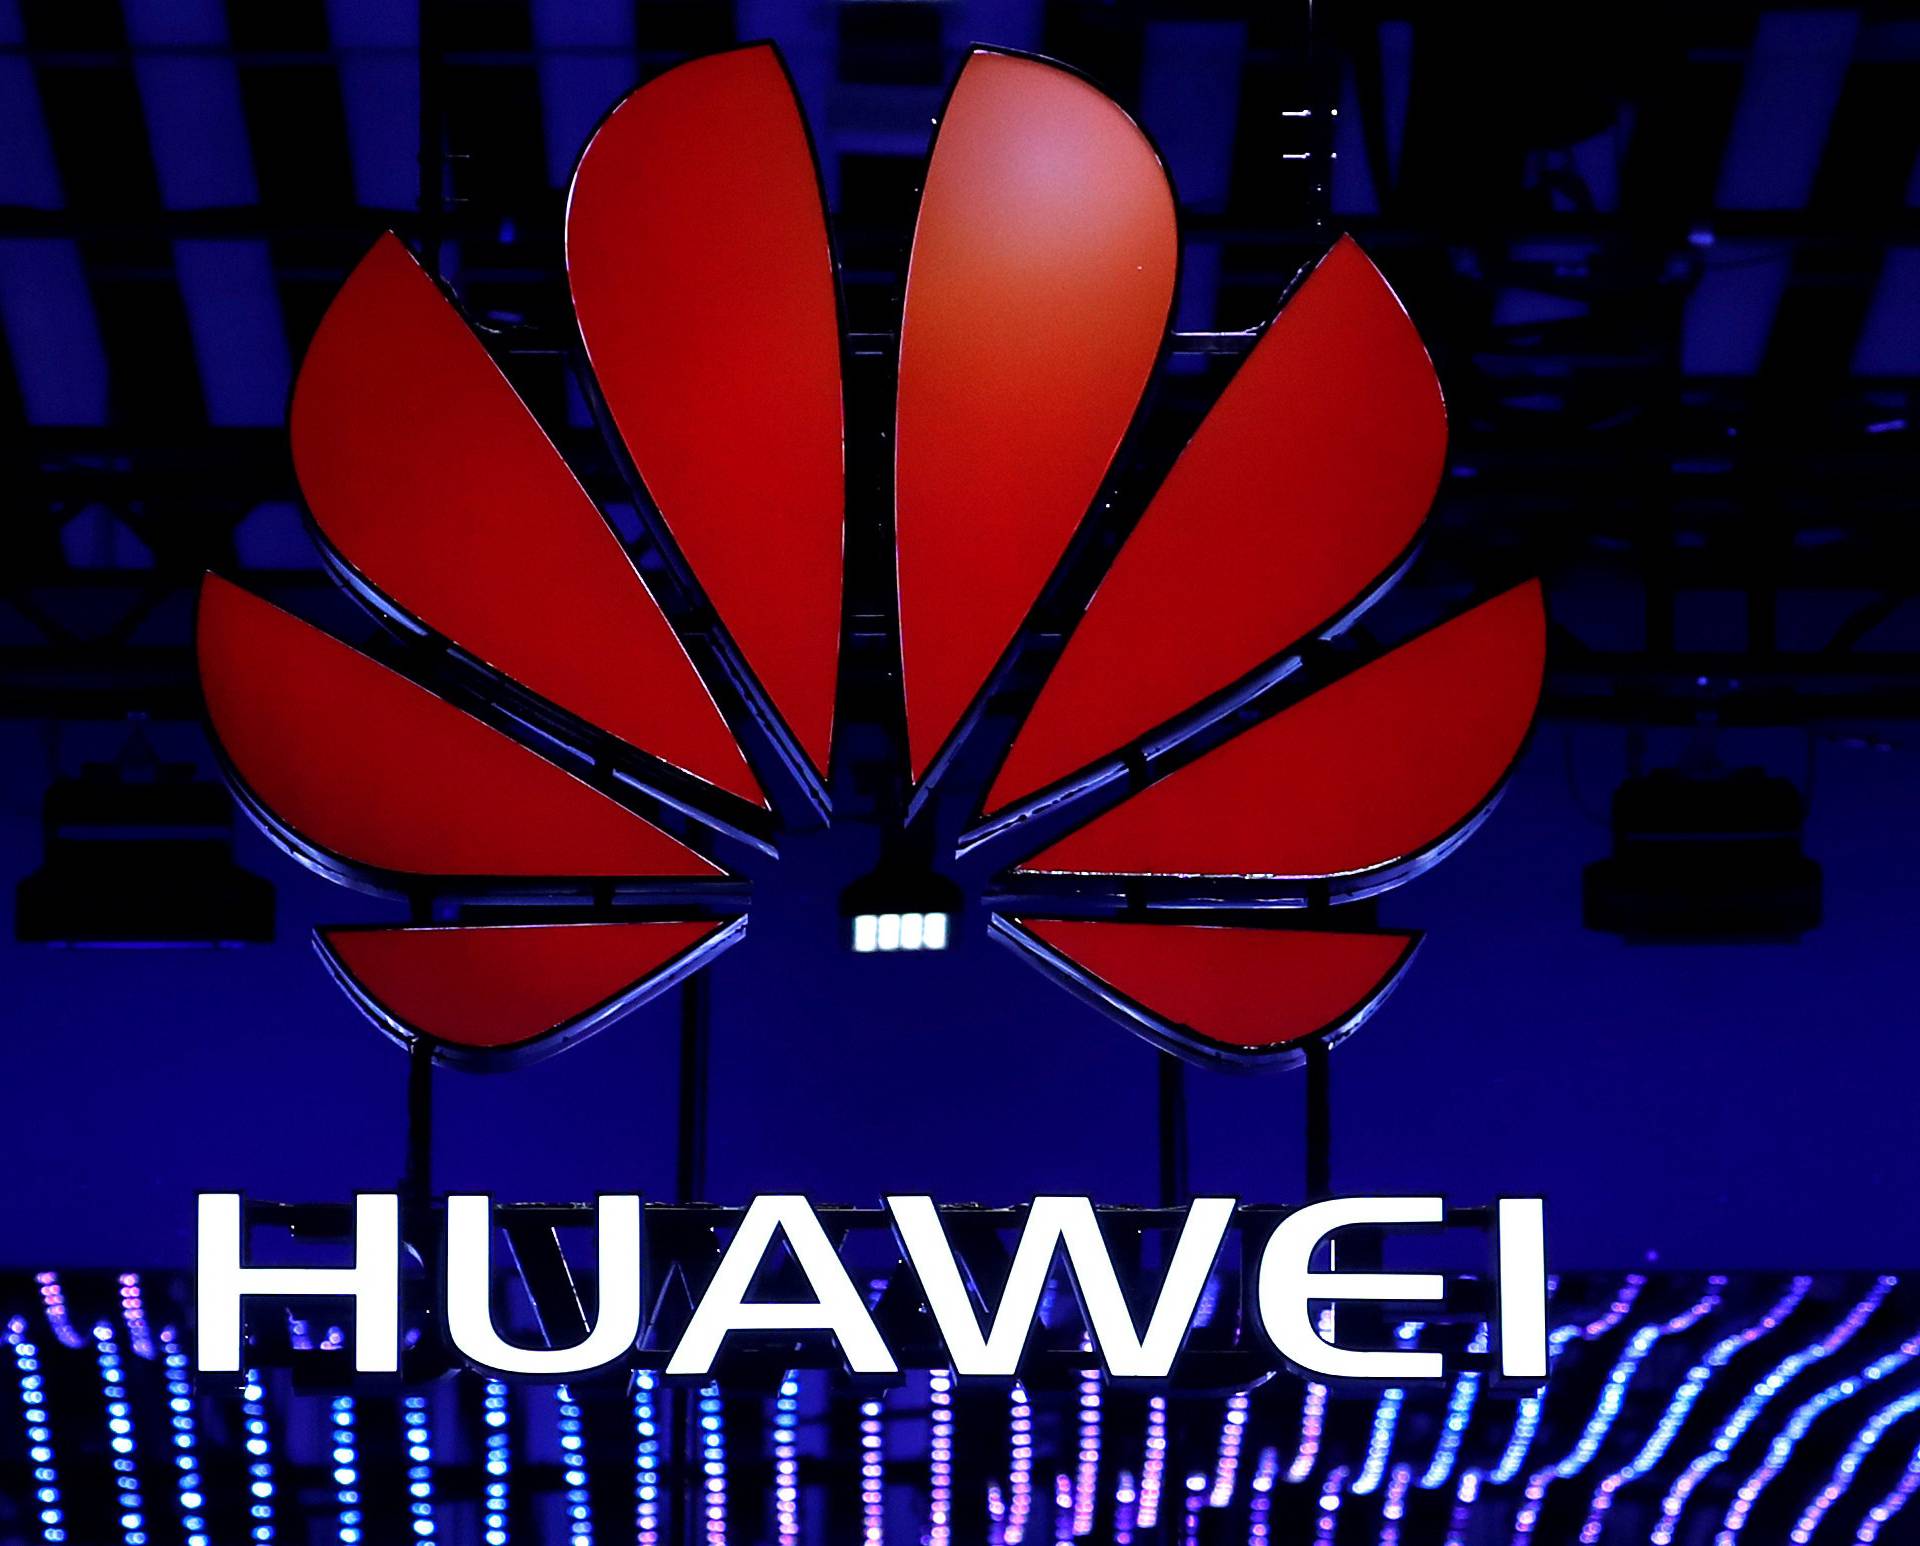 FILE PHOTO: The Huawei logo is seen during the Mobile World Congress in Barcelona